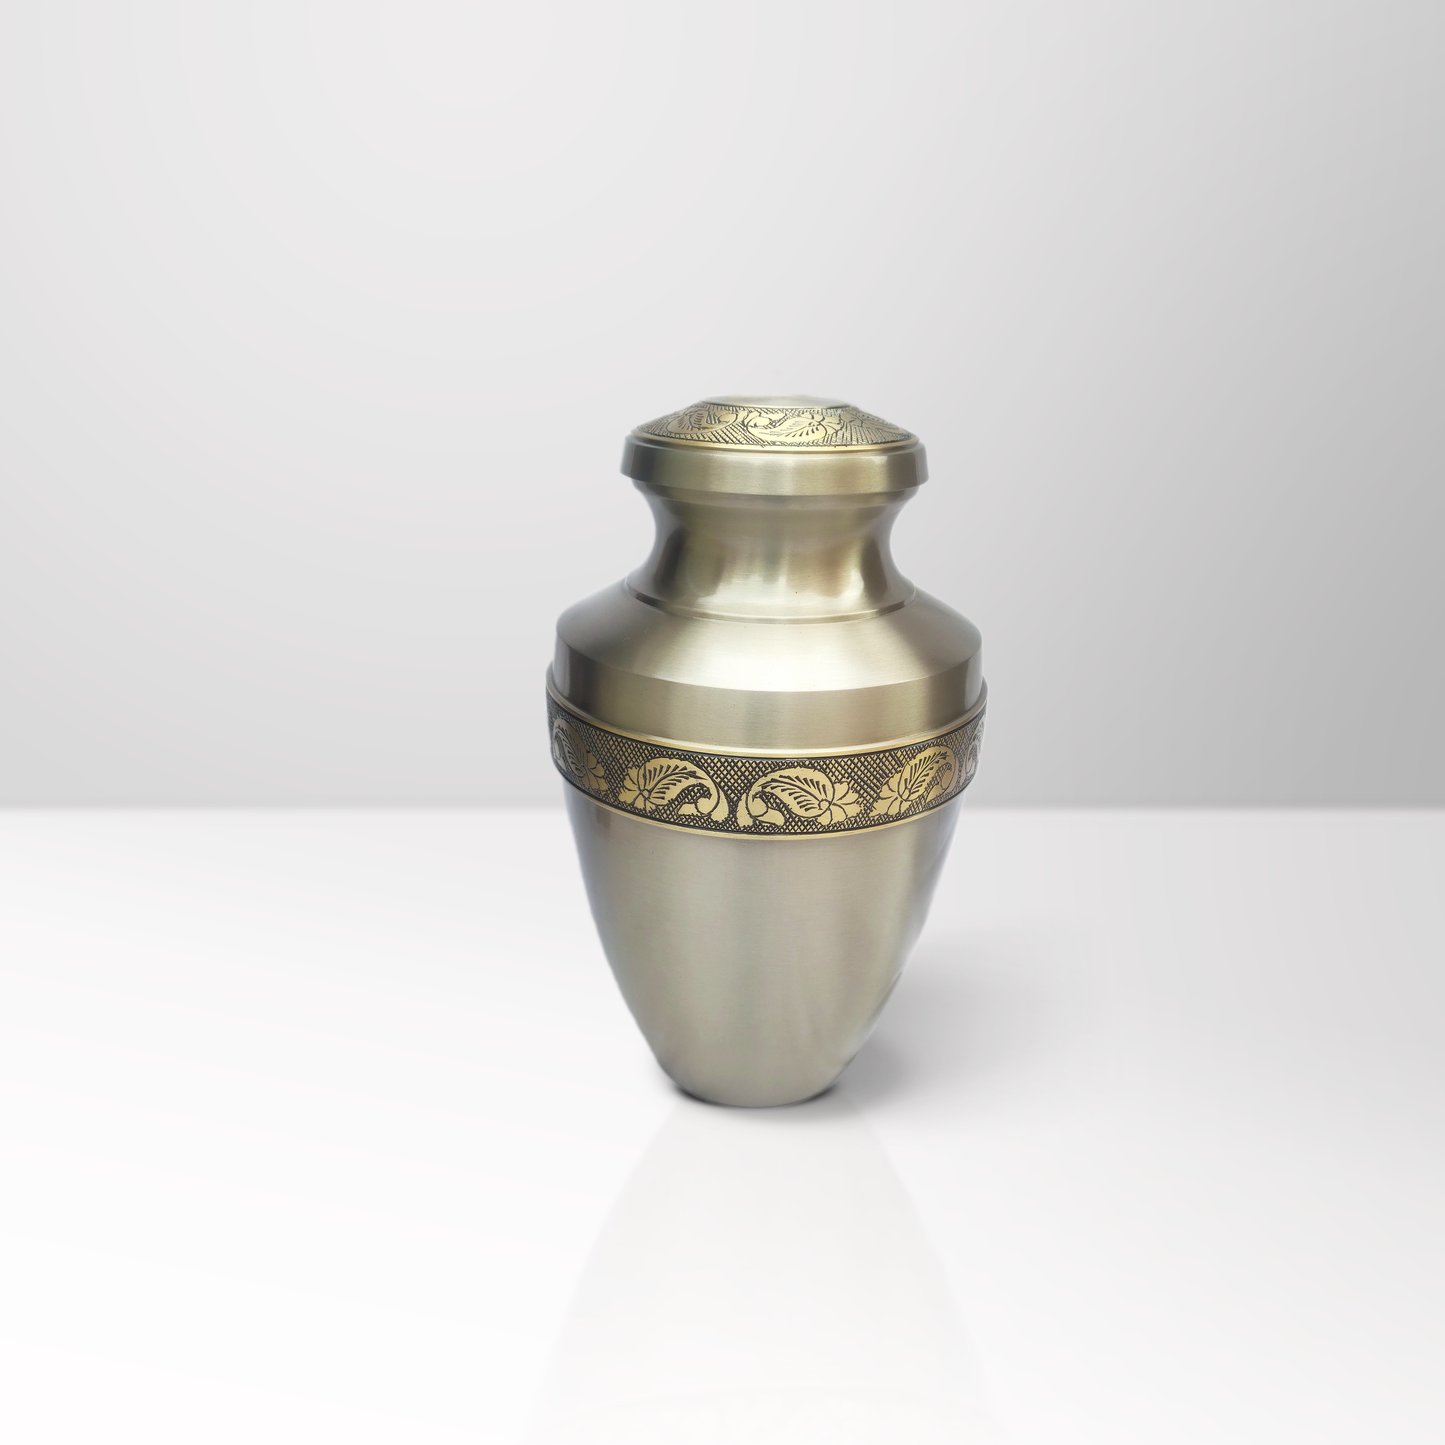 Eterno Adult Ashes Urn-Adult Urn for Ashes-Cremation Urns- The cremation urns for ashes and keepsakes for ashes come in a variety of styles to suit most tastes, decor and different volumes of funeral ashes.